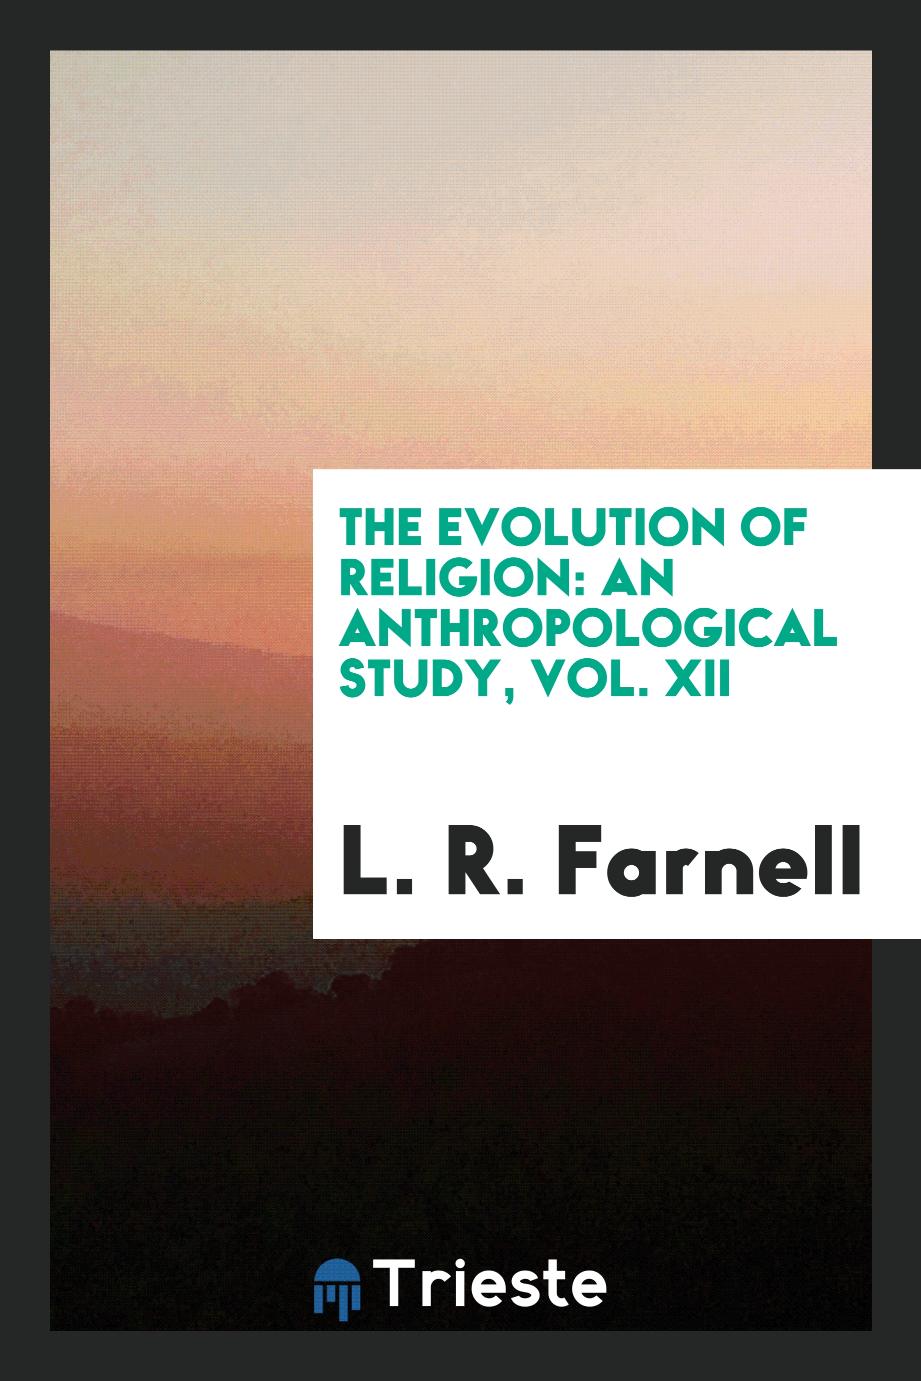 The evolution of religion: an anthropological study, Vol. XII